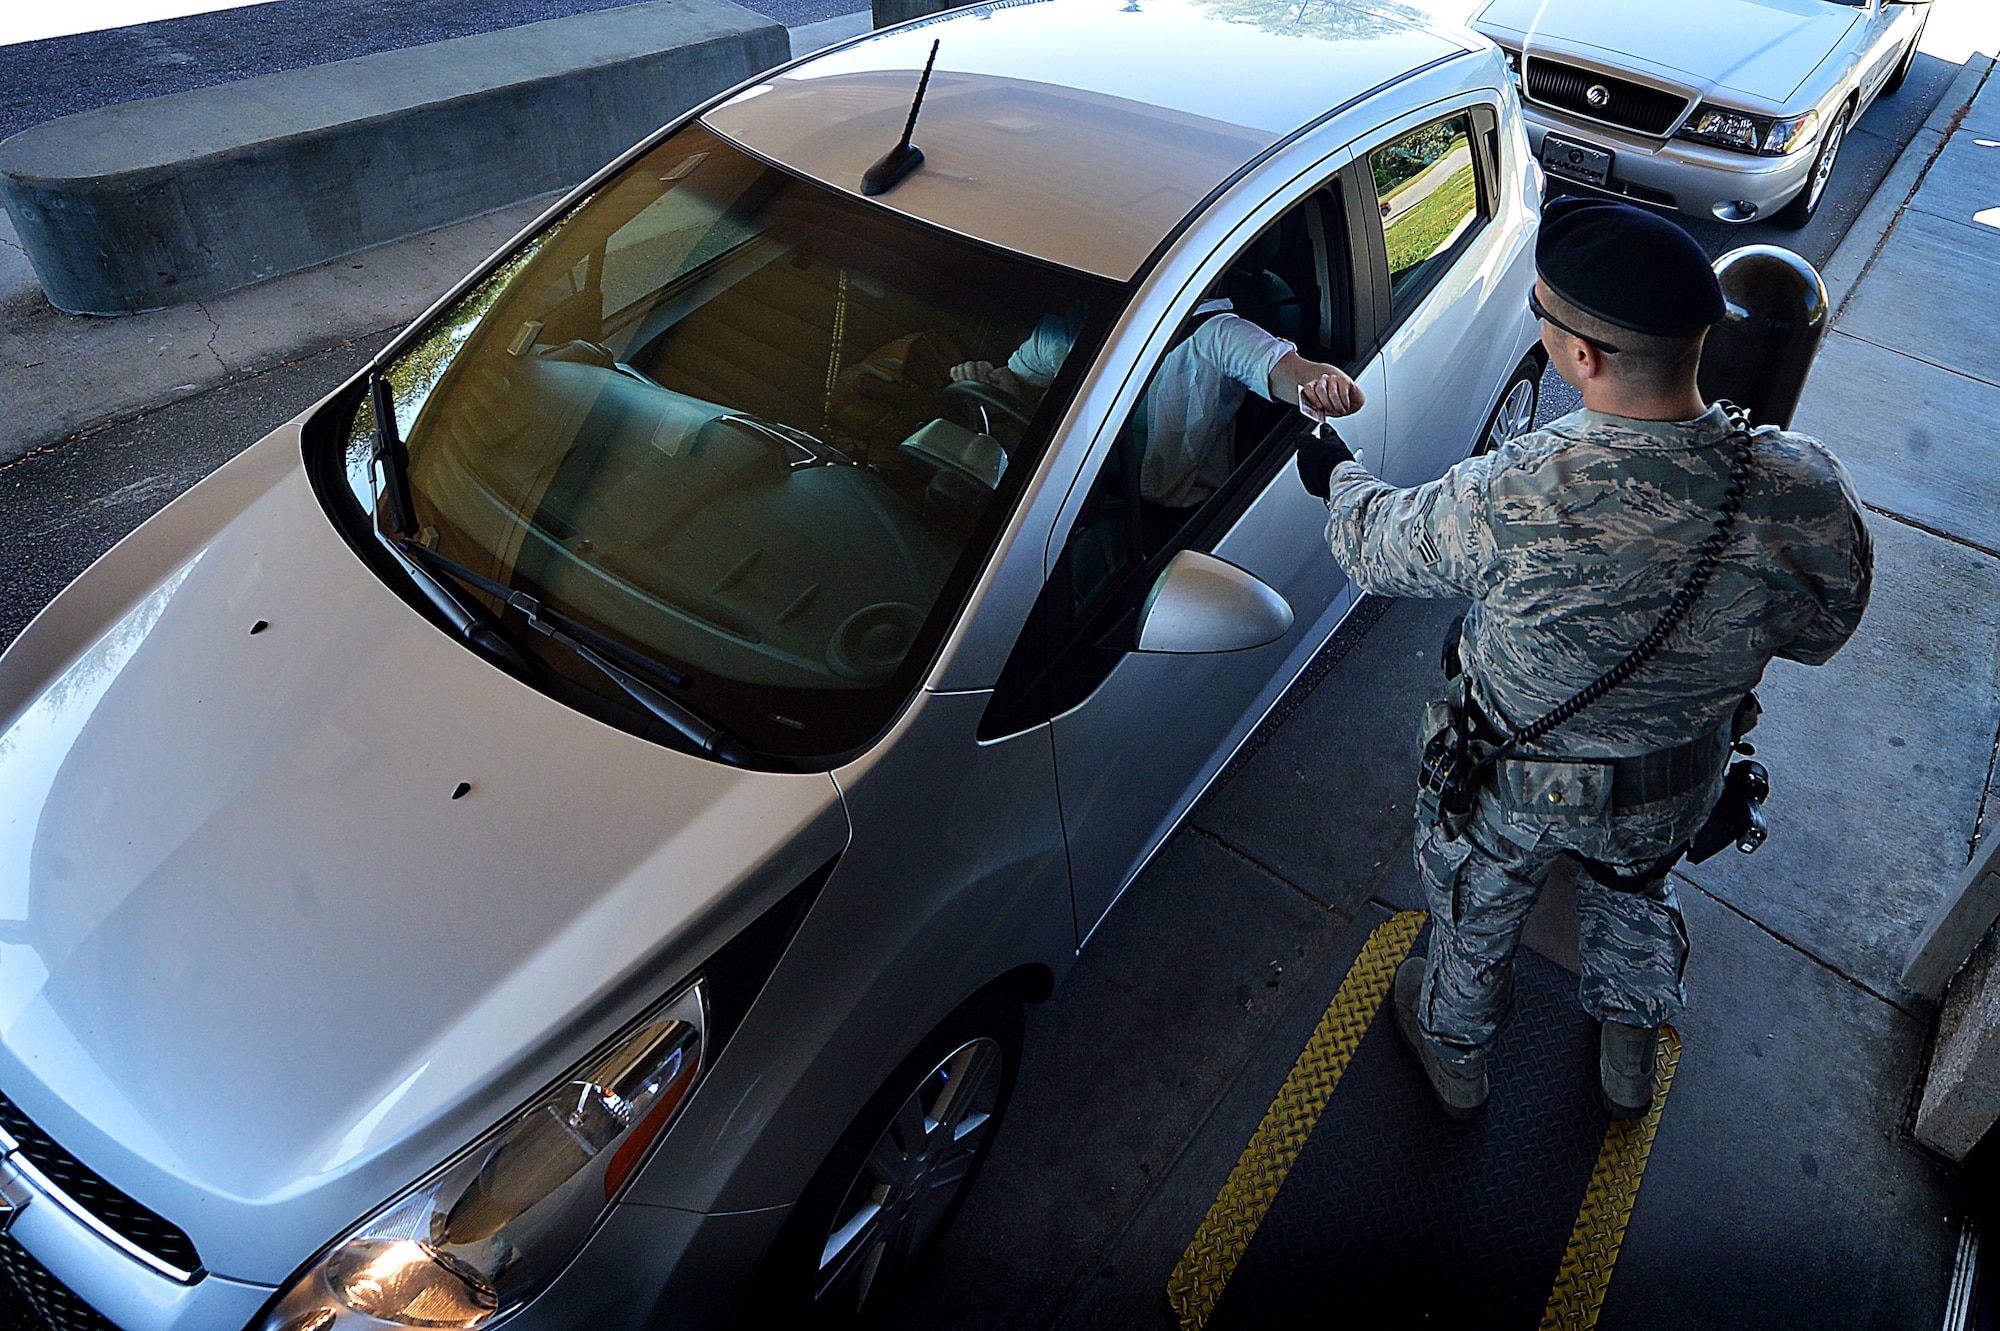 U.S. Air Force Senior Airman Samuel Montgomery, 20th Security Forces Squadron patrolman, inspects identification cards at the Main Gate at Shaw Air Force Base, S.C., March 29, 2016. 20th SFS Airmen are tasked with ensuring the security of the base and its assets while simultaneously protecting members of Team Shaw and their families. (U.S. Air Force photo by Senior Airman Michael Cossaboom)